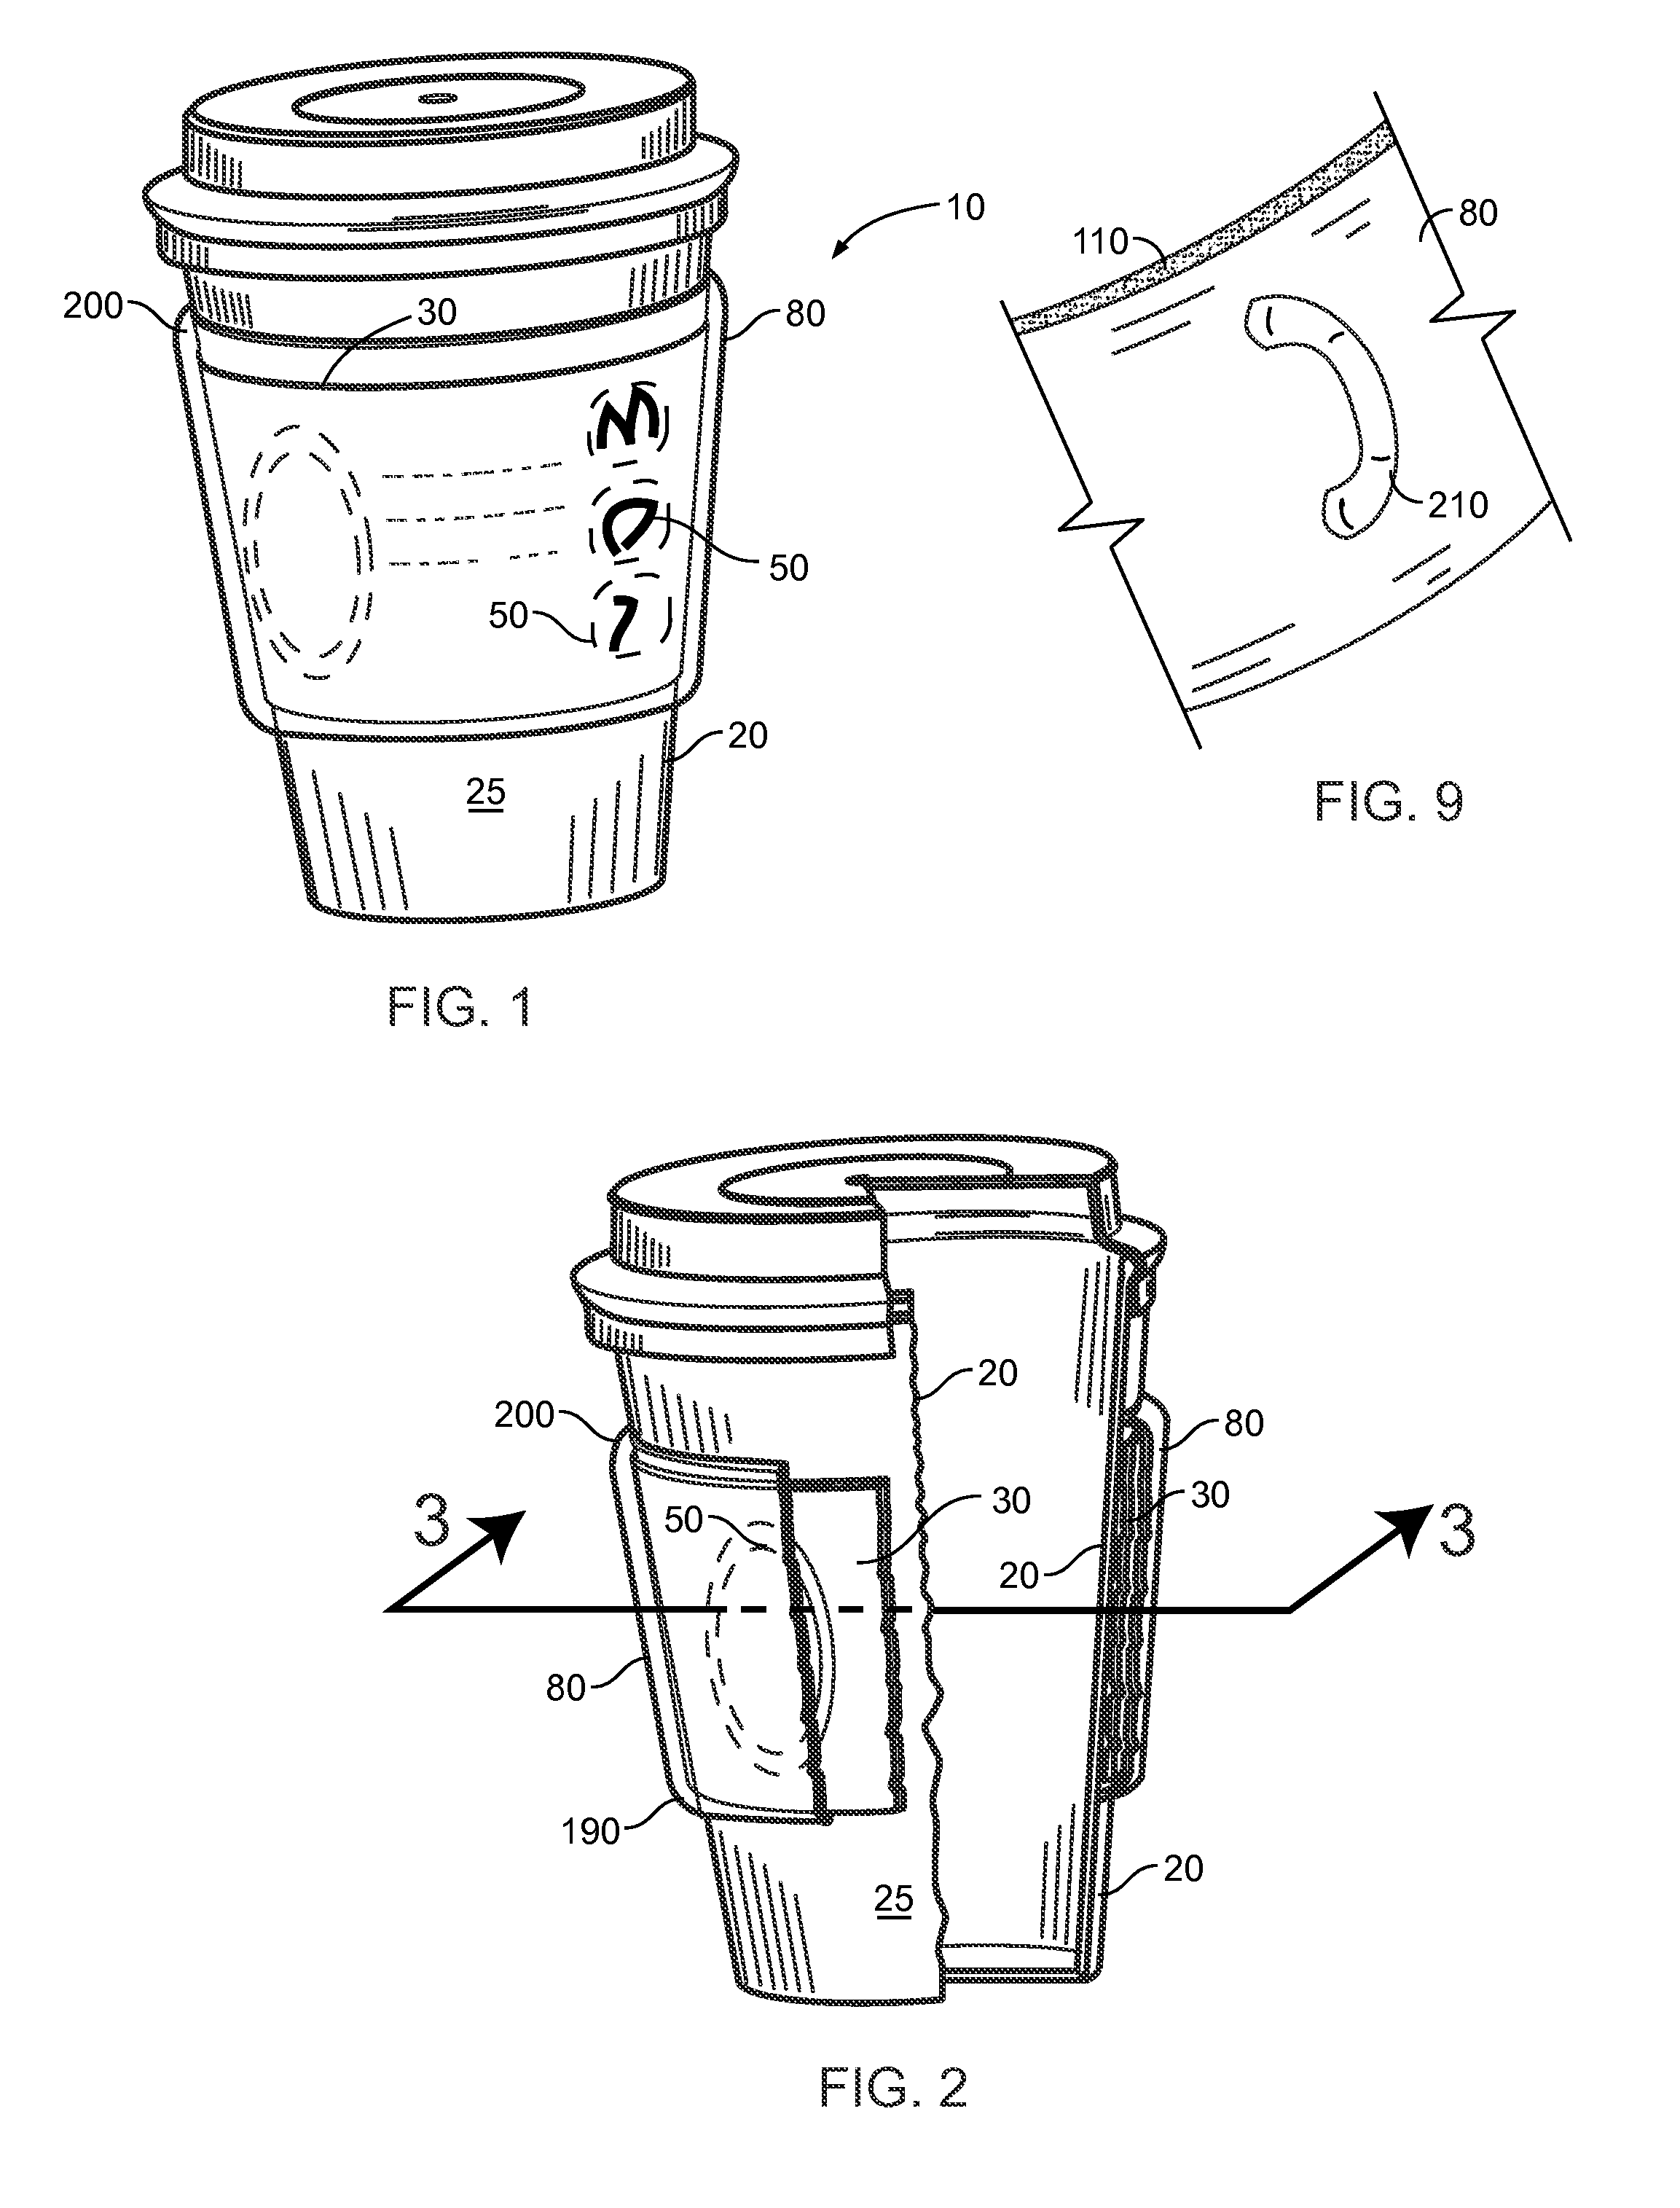 Insulator sleeve for a beverage container